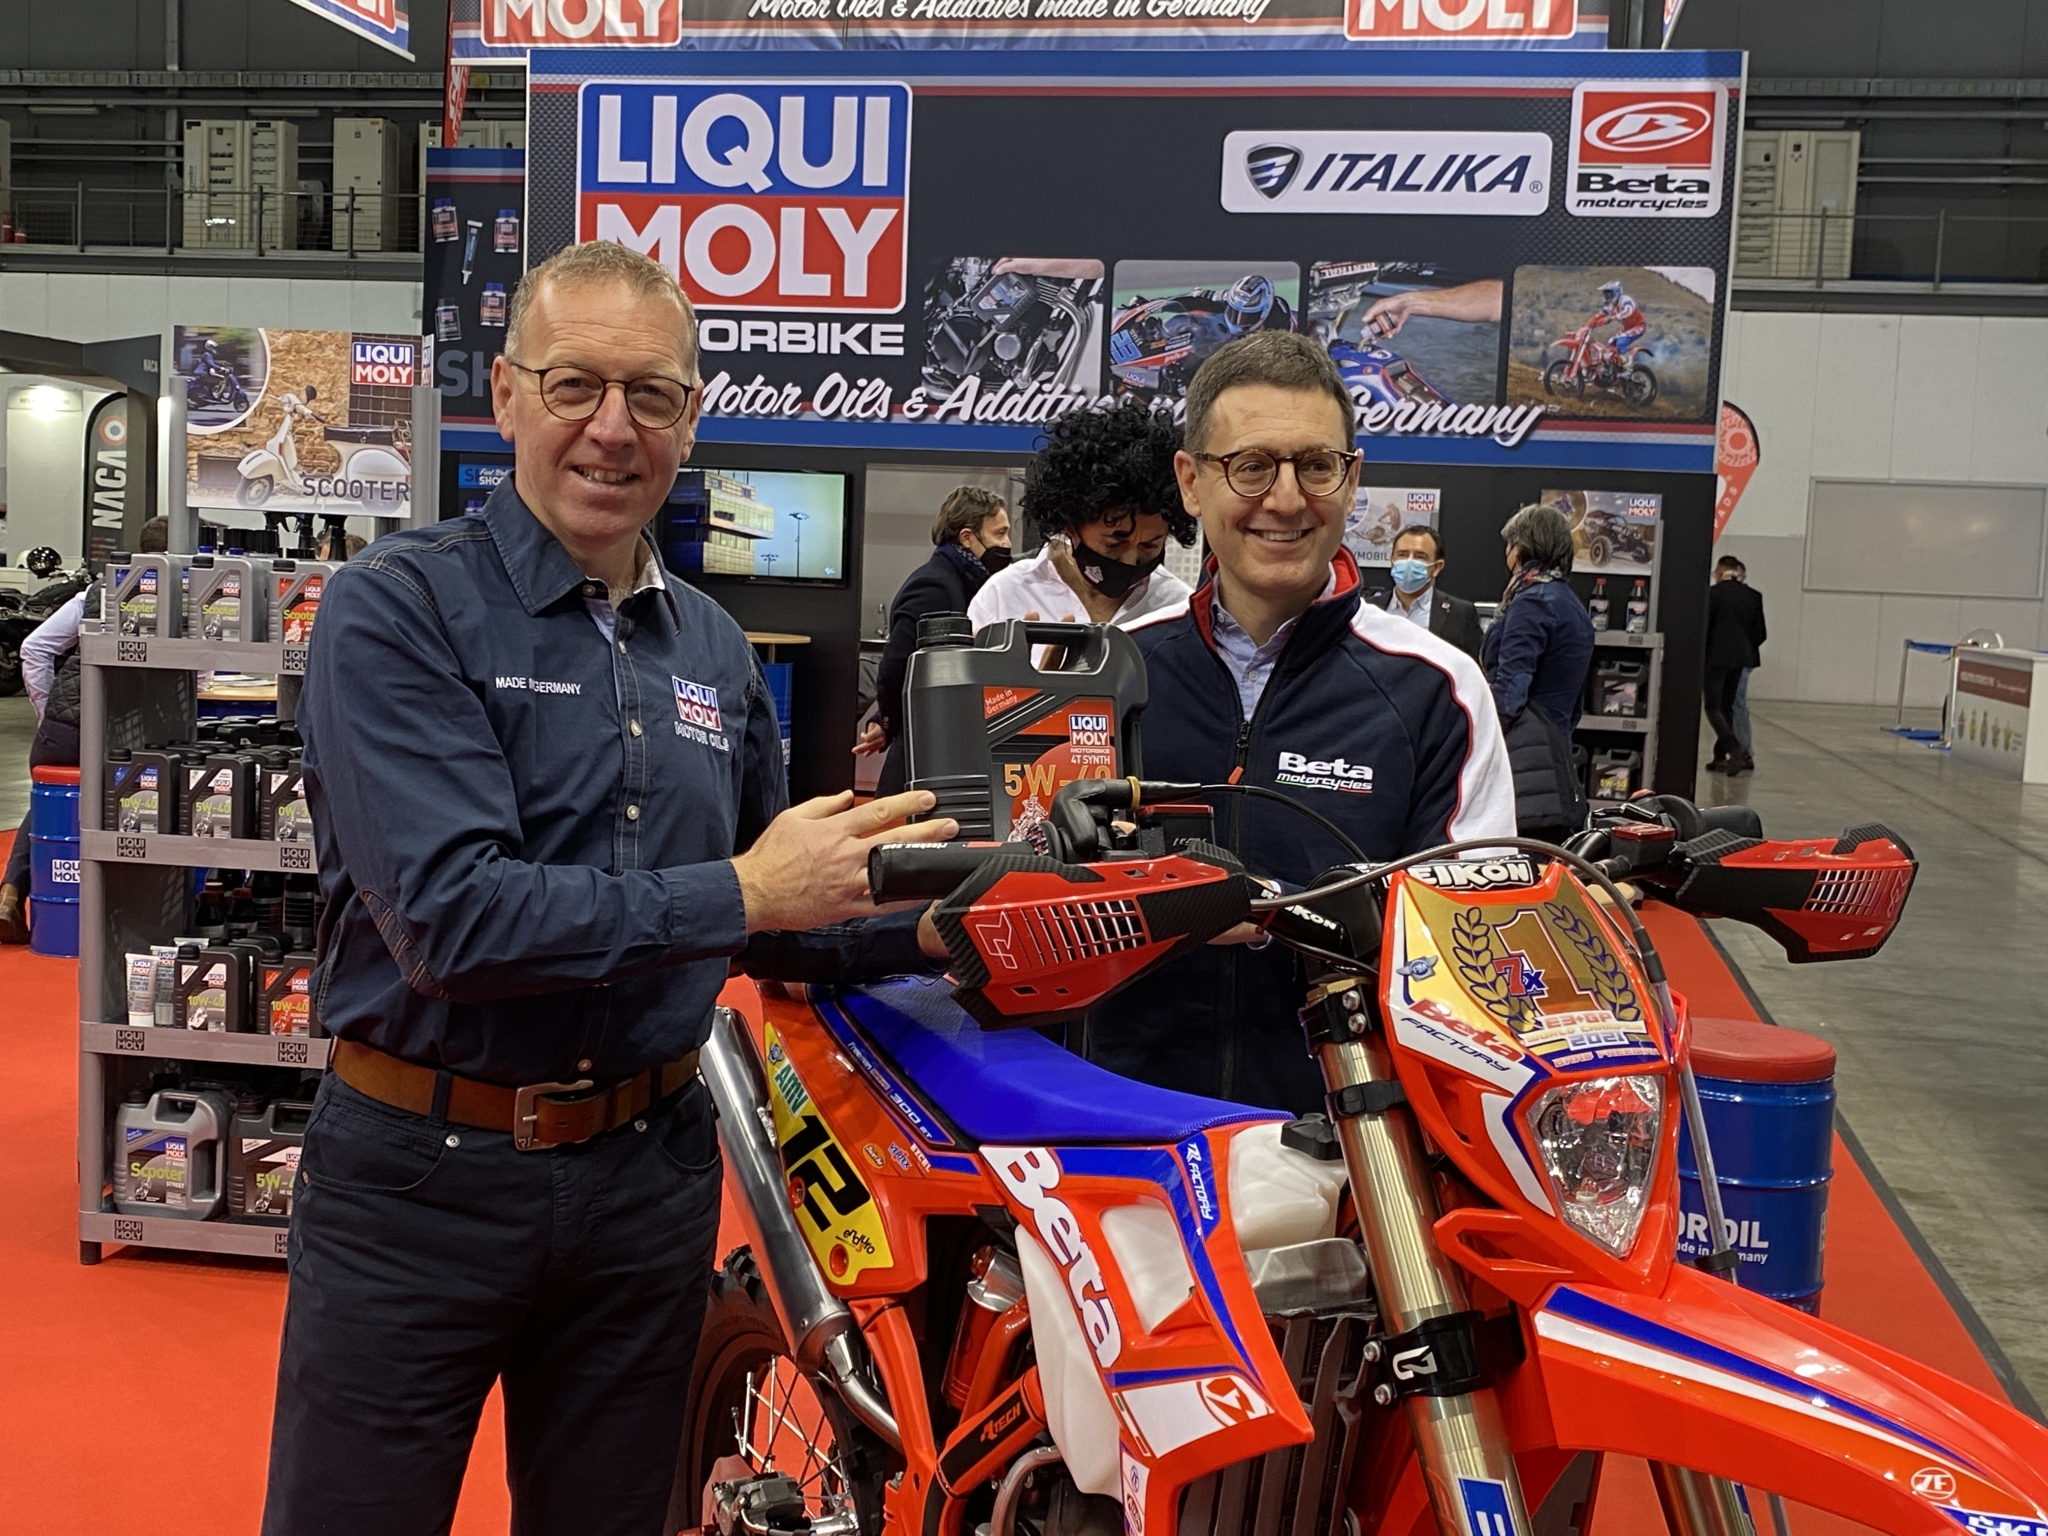 Liqui Moly extends cooperation with Beta